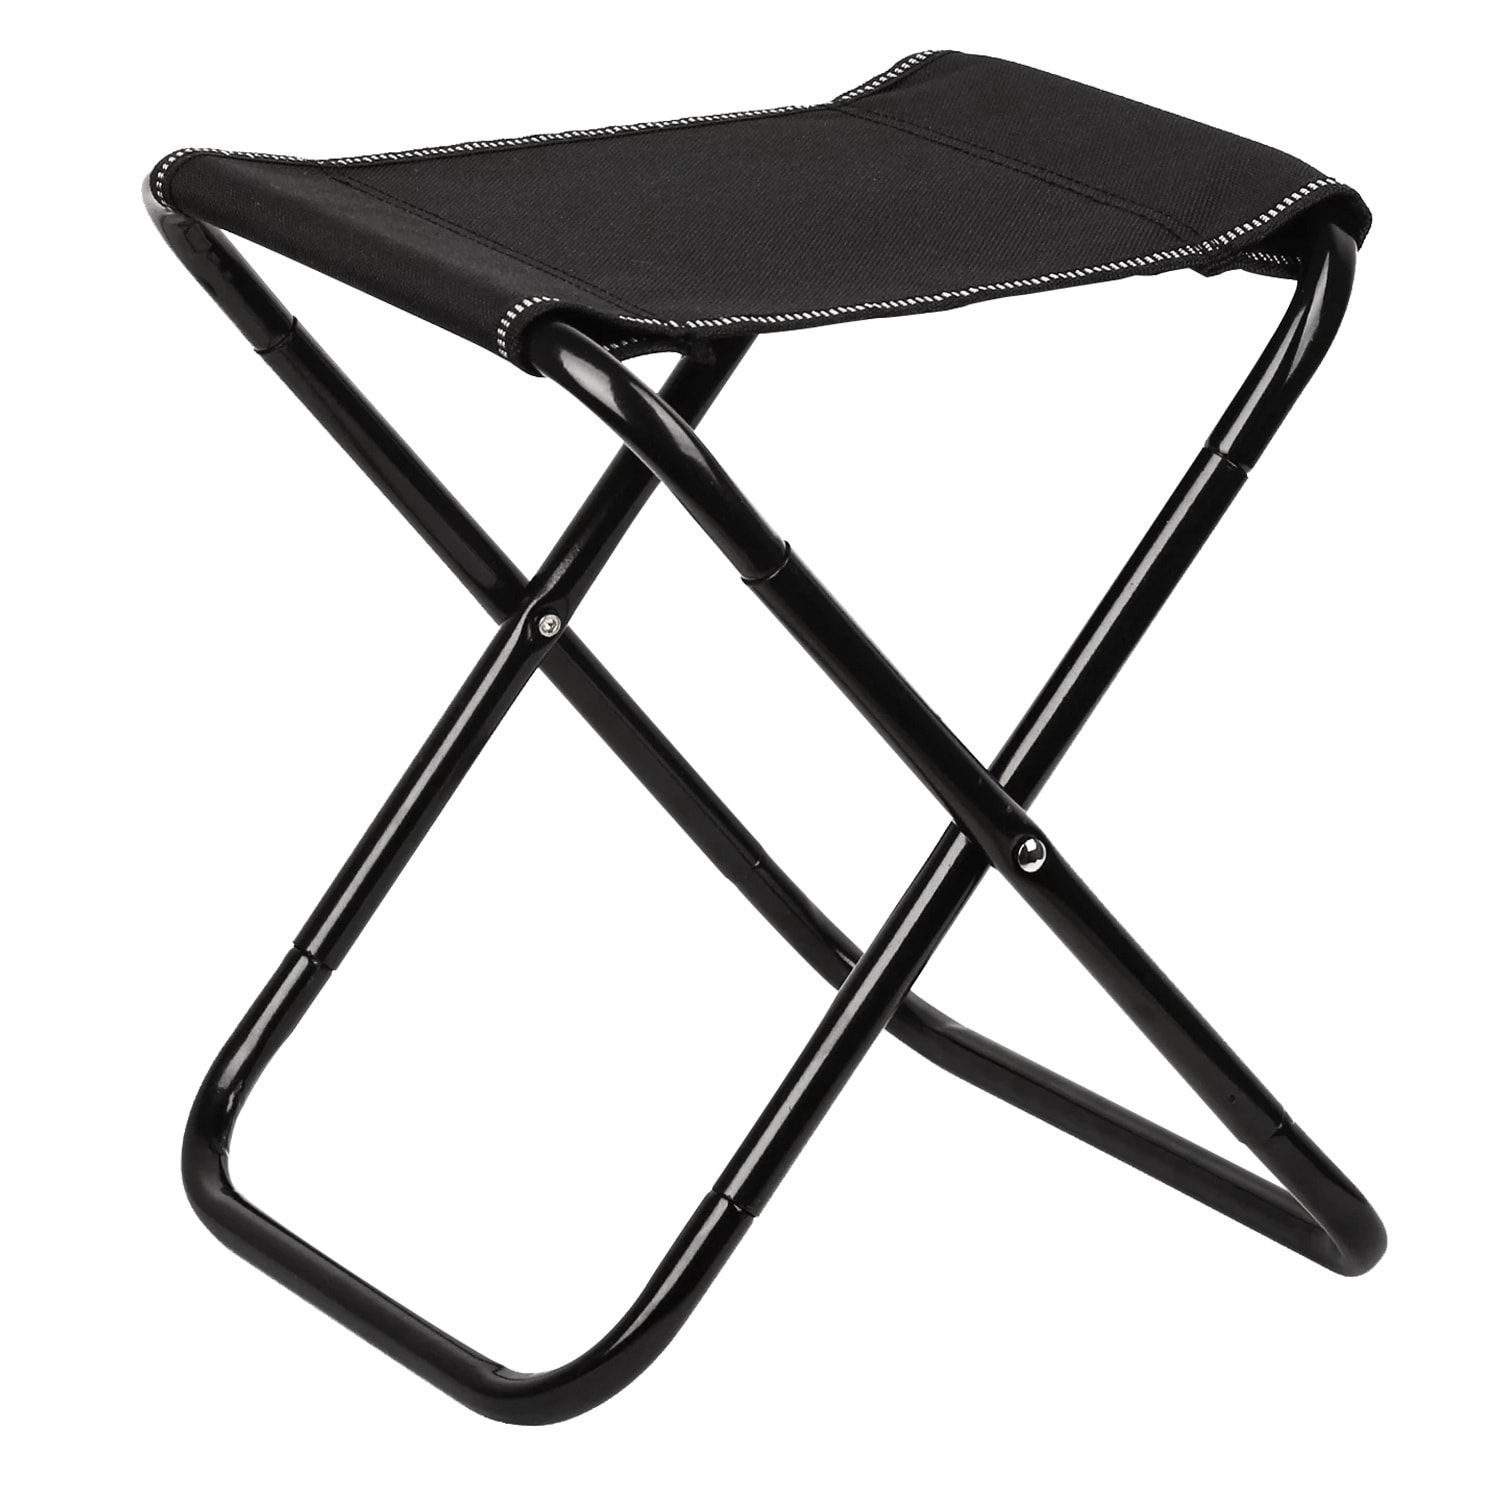 Foldable Portable Camping Stool With Carry Bag